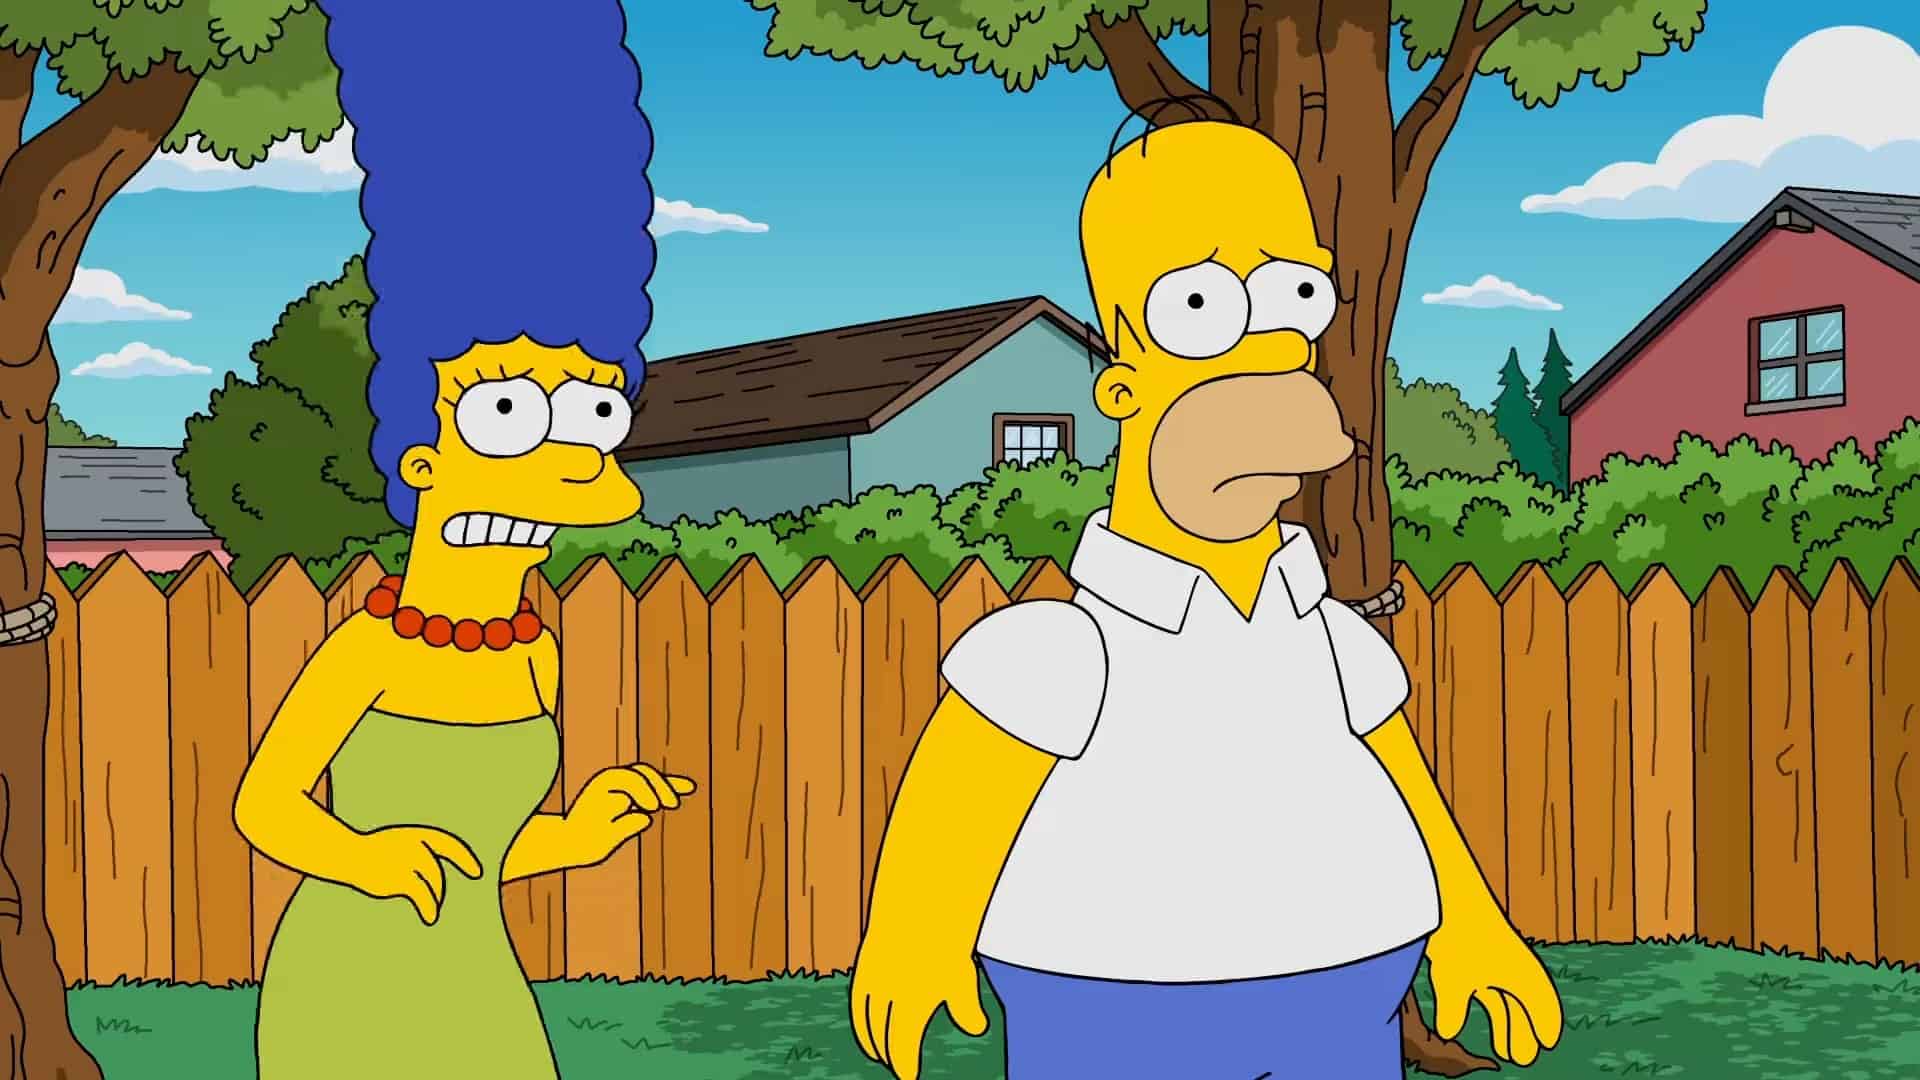 The Simpsons Season 35 Episode 1 Release Date and Preview